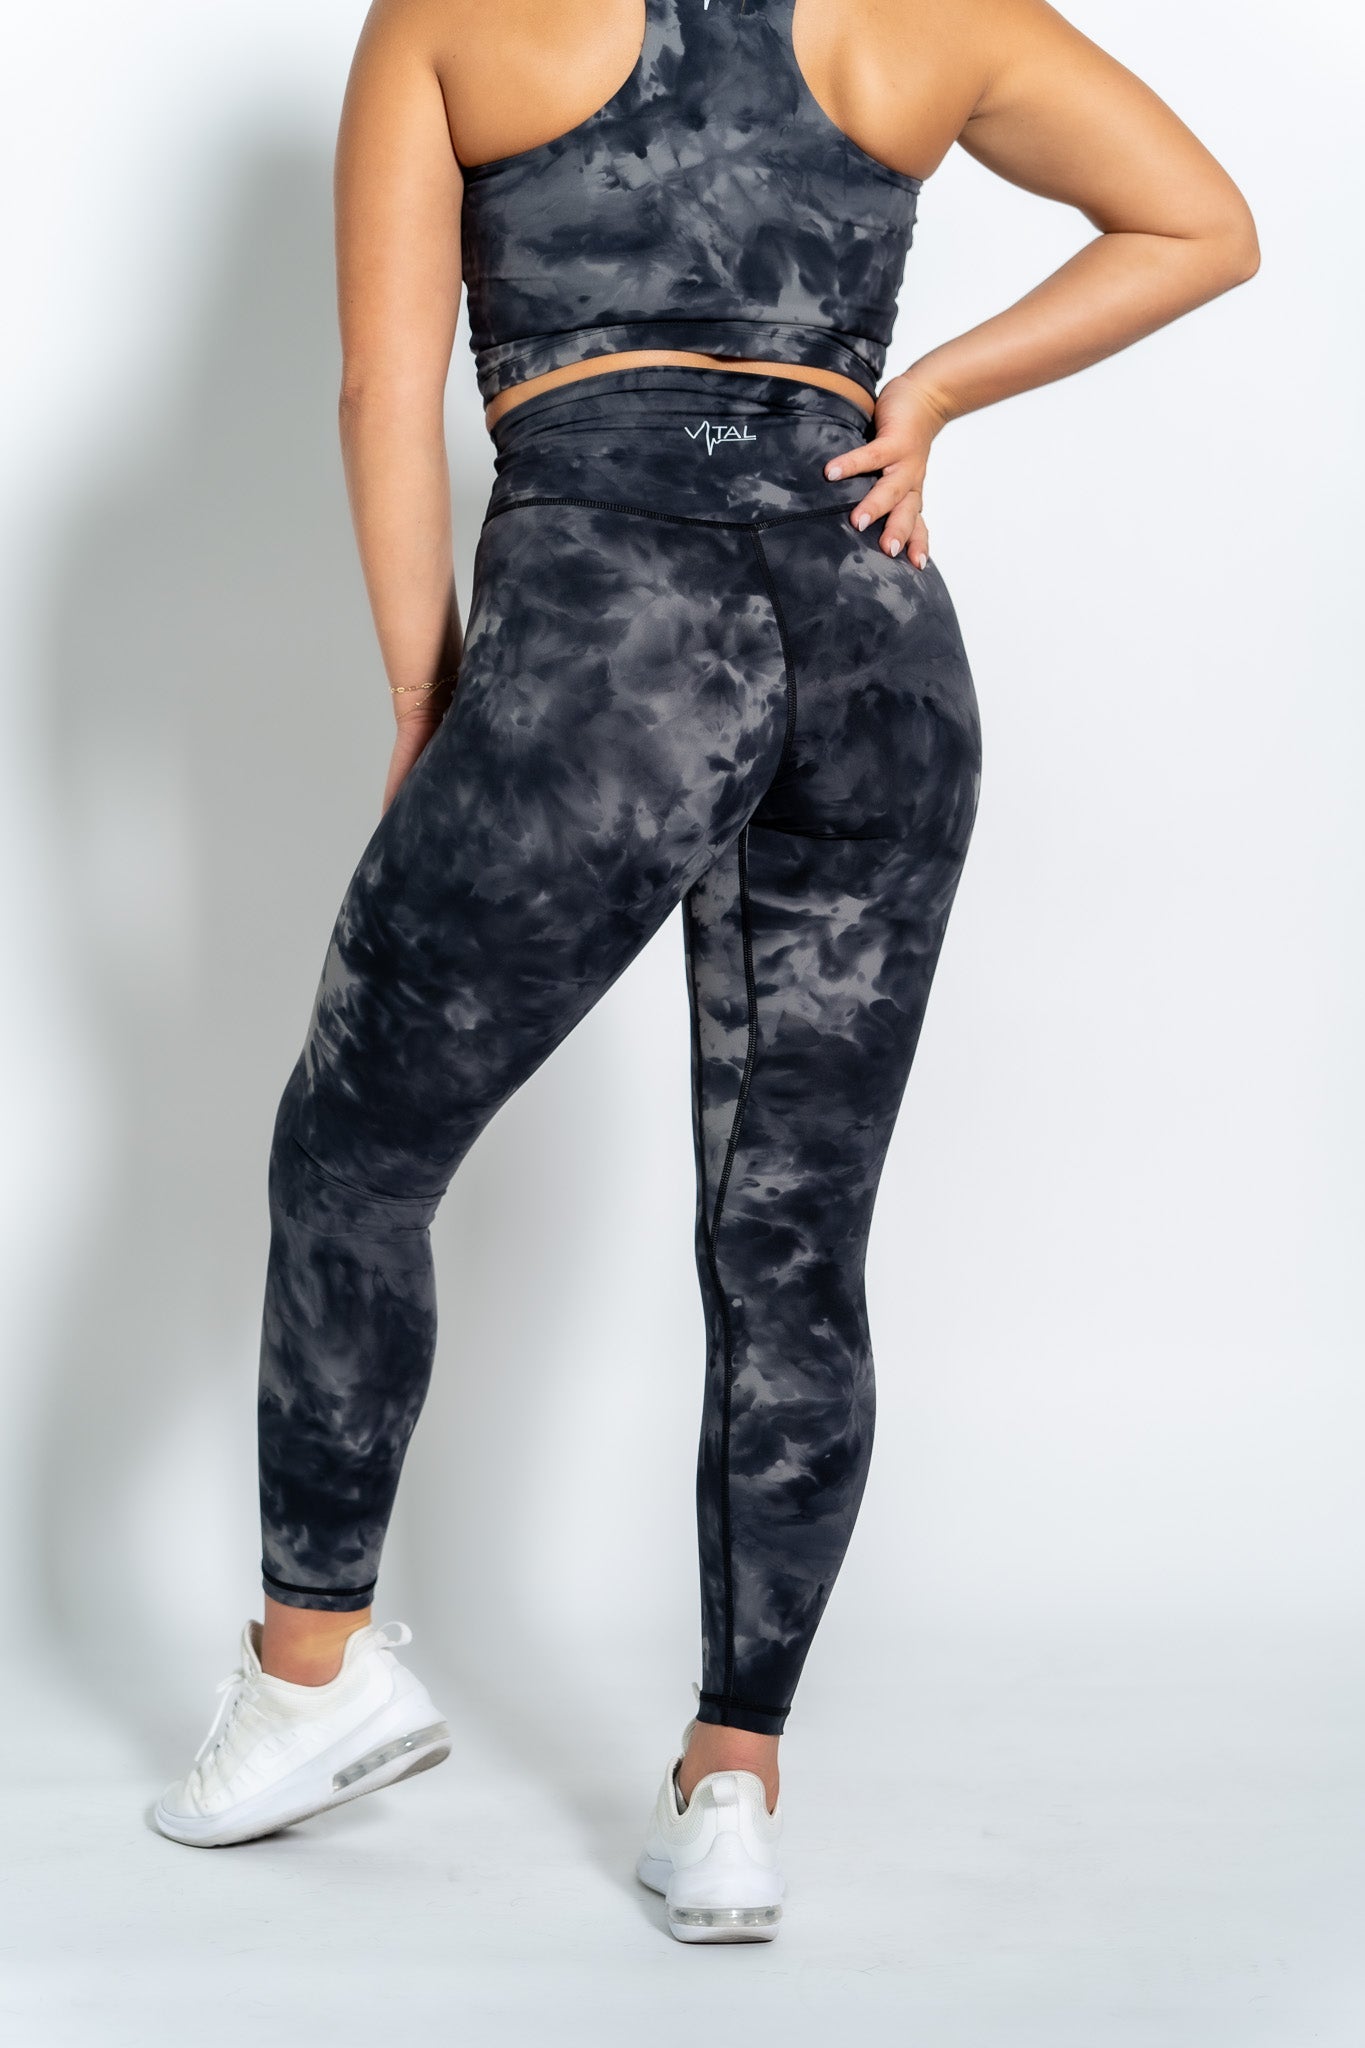 Belleziva Leggings & Bra Workout Set - Yoga, Exercise, Fitness - Size: –  Military Steals and Surplus